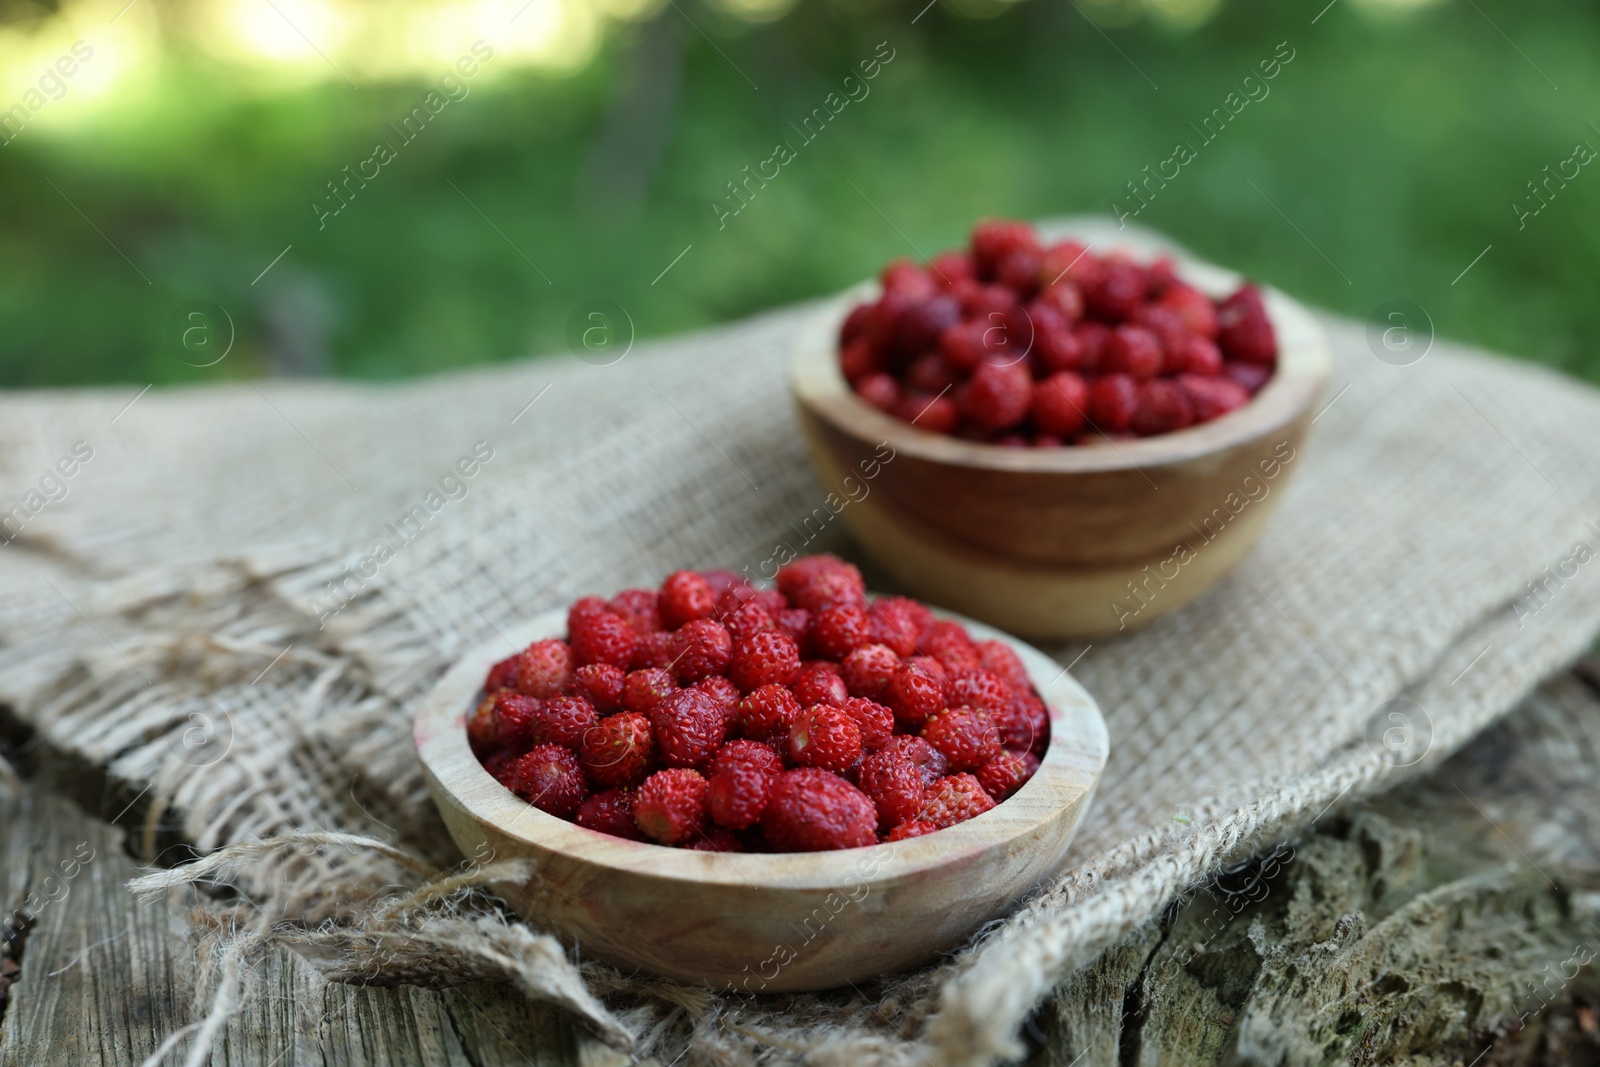 Photo of Tasty wild strawberries in bowls on wooden stump outdoors